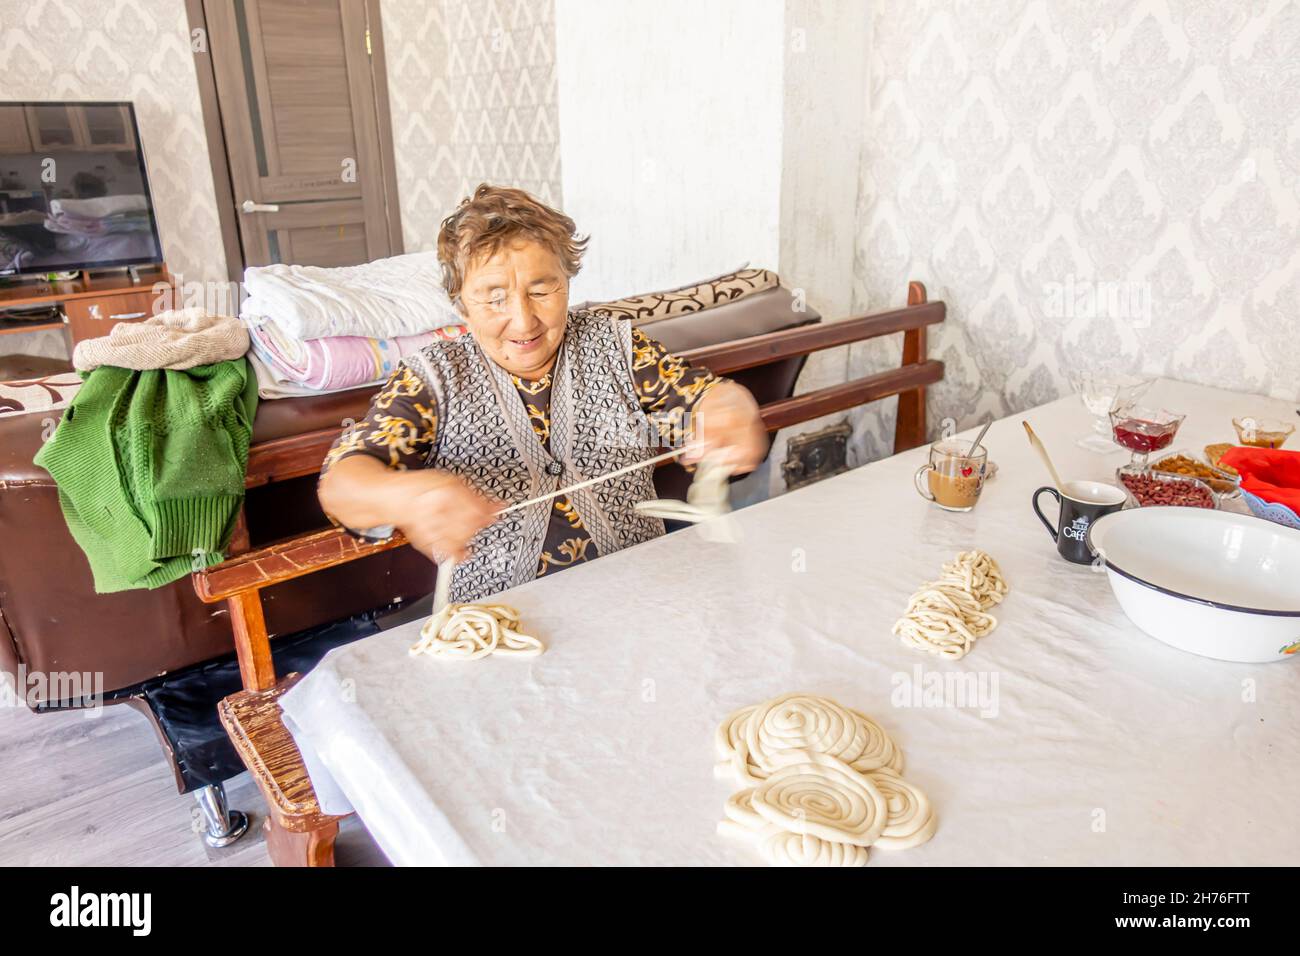 An elderly kazakh woman preparing pooled long noodles for cooking laghman dish- a traditional Central Asian meal Stock Photo